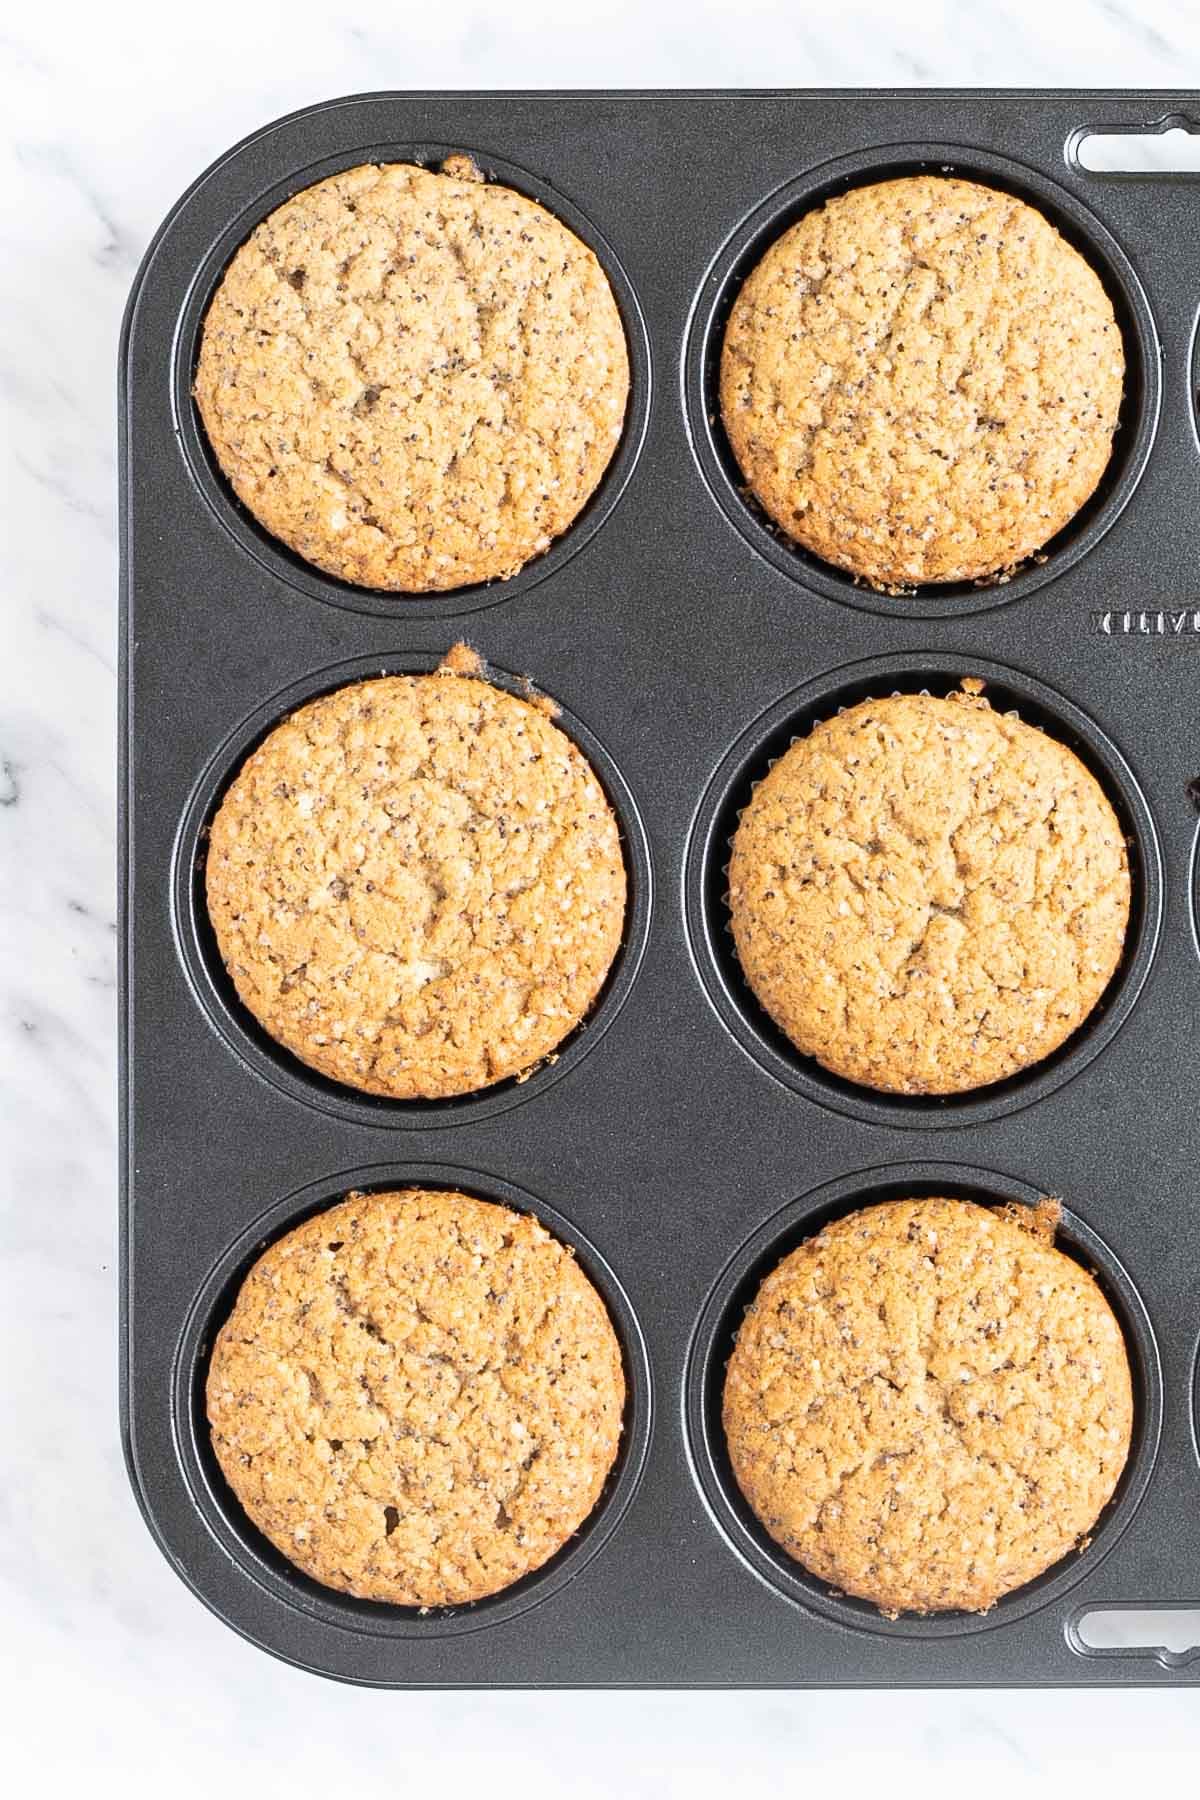 Baked lemon poppy seed muffins in a muffin tin